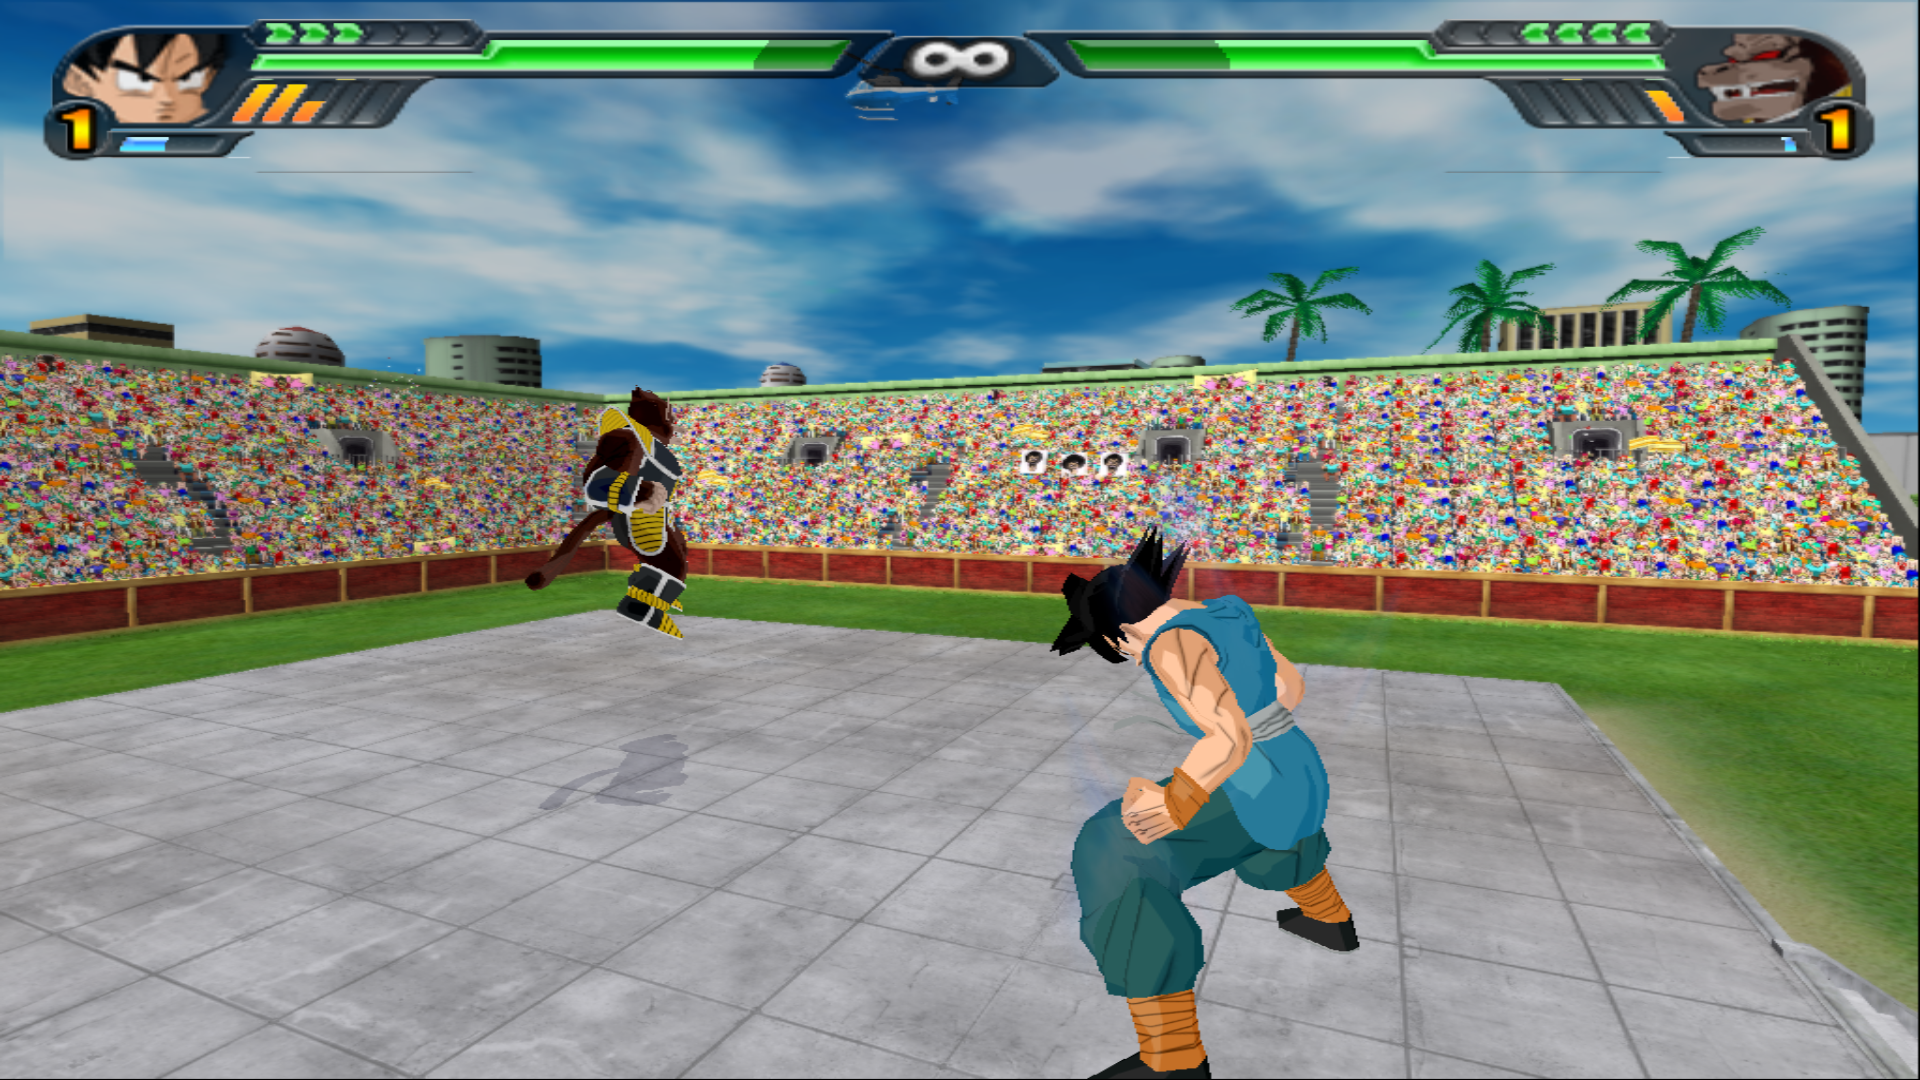 How do I fix the outline issue in this game? nethersx2/aethersx2 Game: Dragon  ball Z Budokai Tenkaichi 3 : r/EmulationOnAndroid